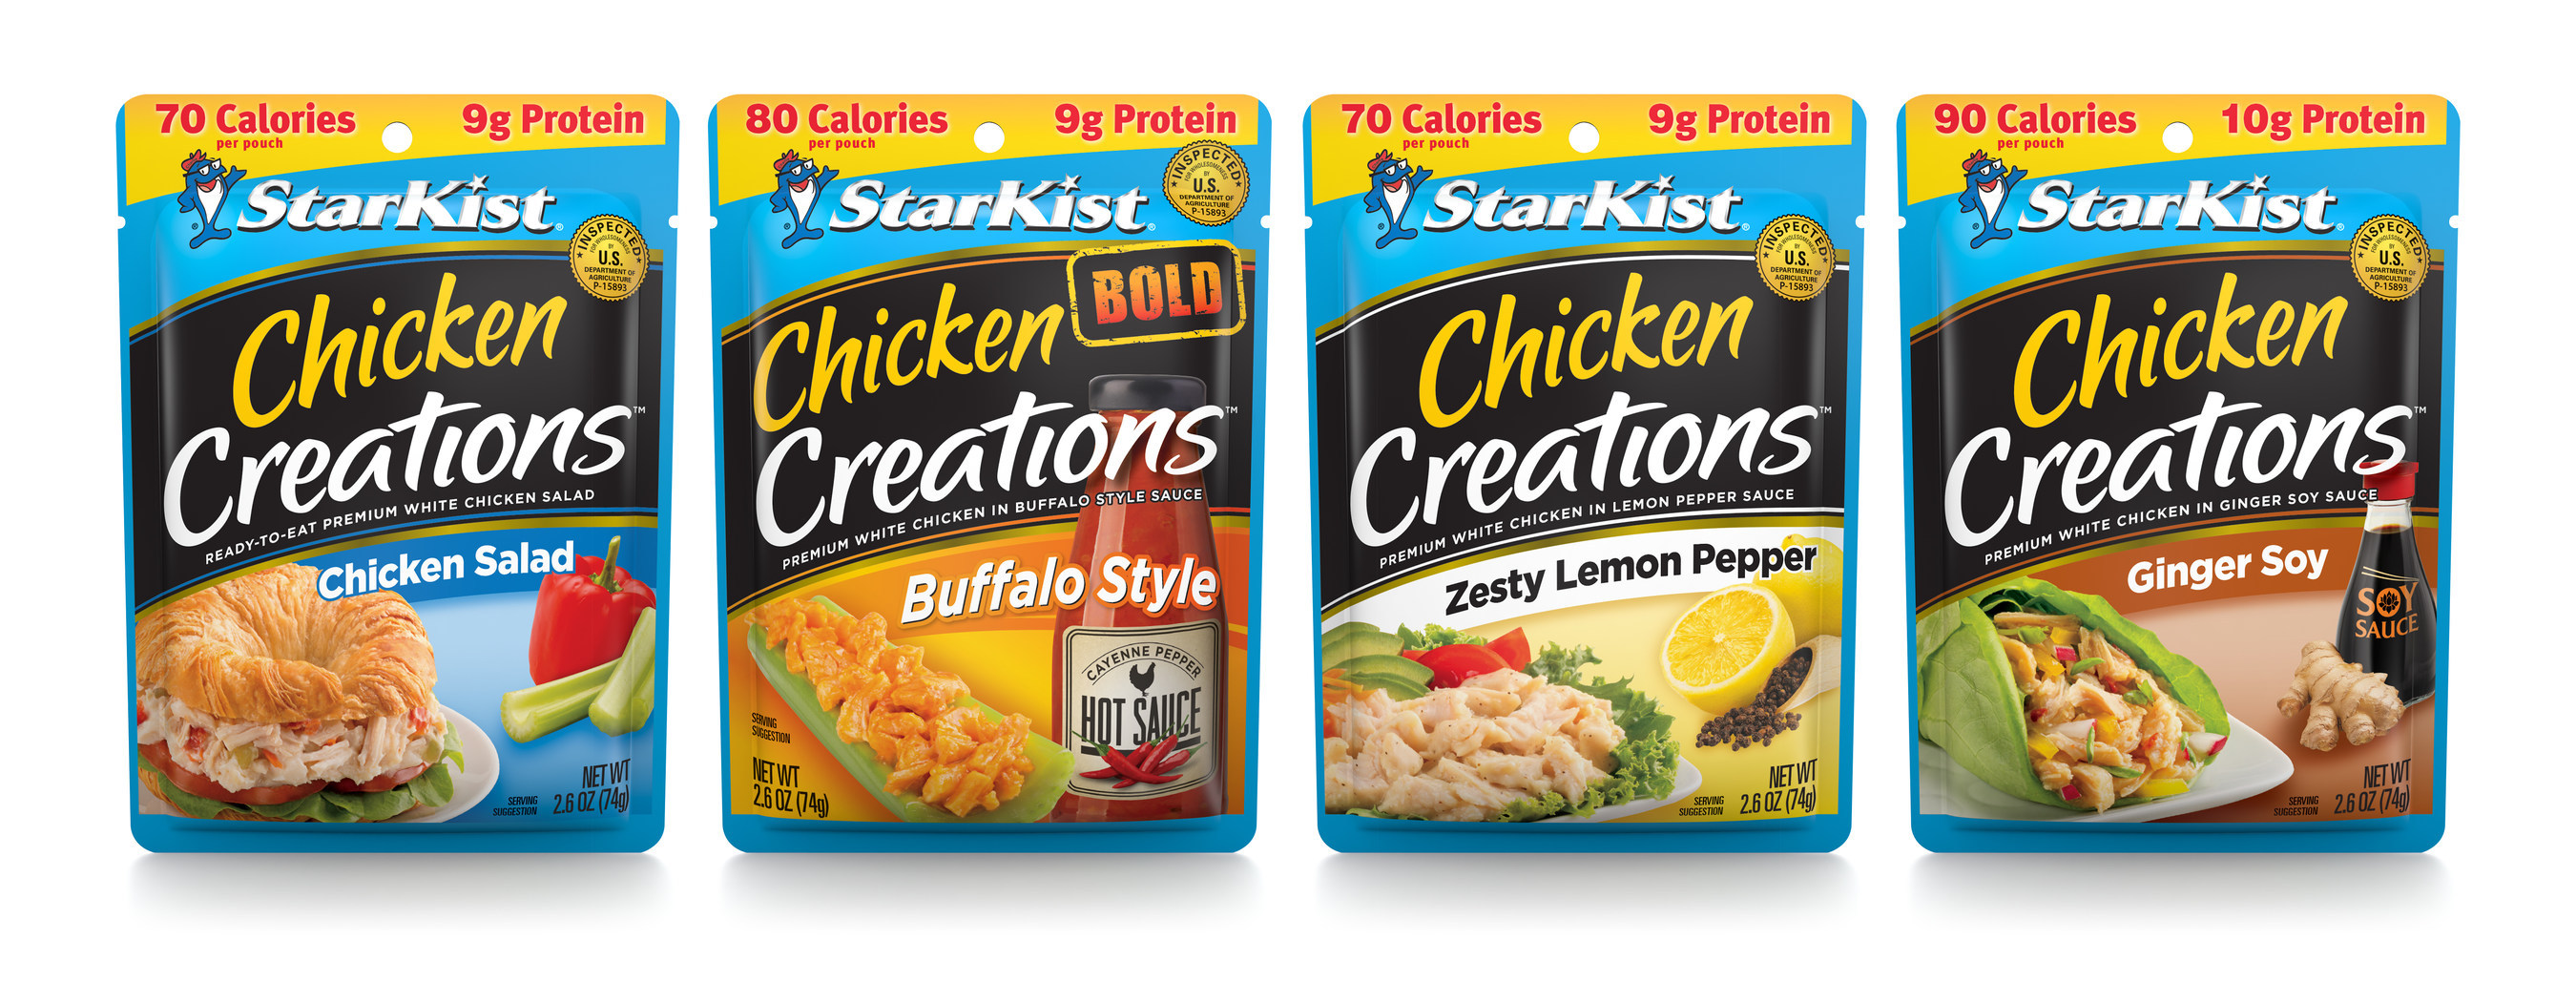 StarKist Ventures Into Chicken With New Creations Pouches